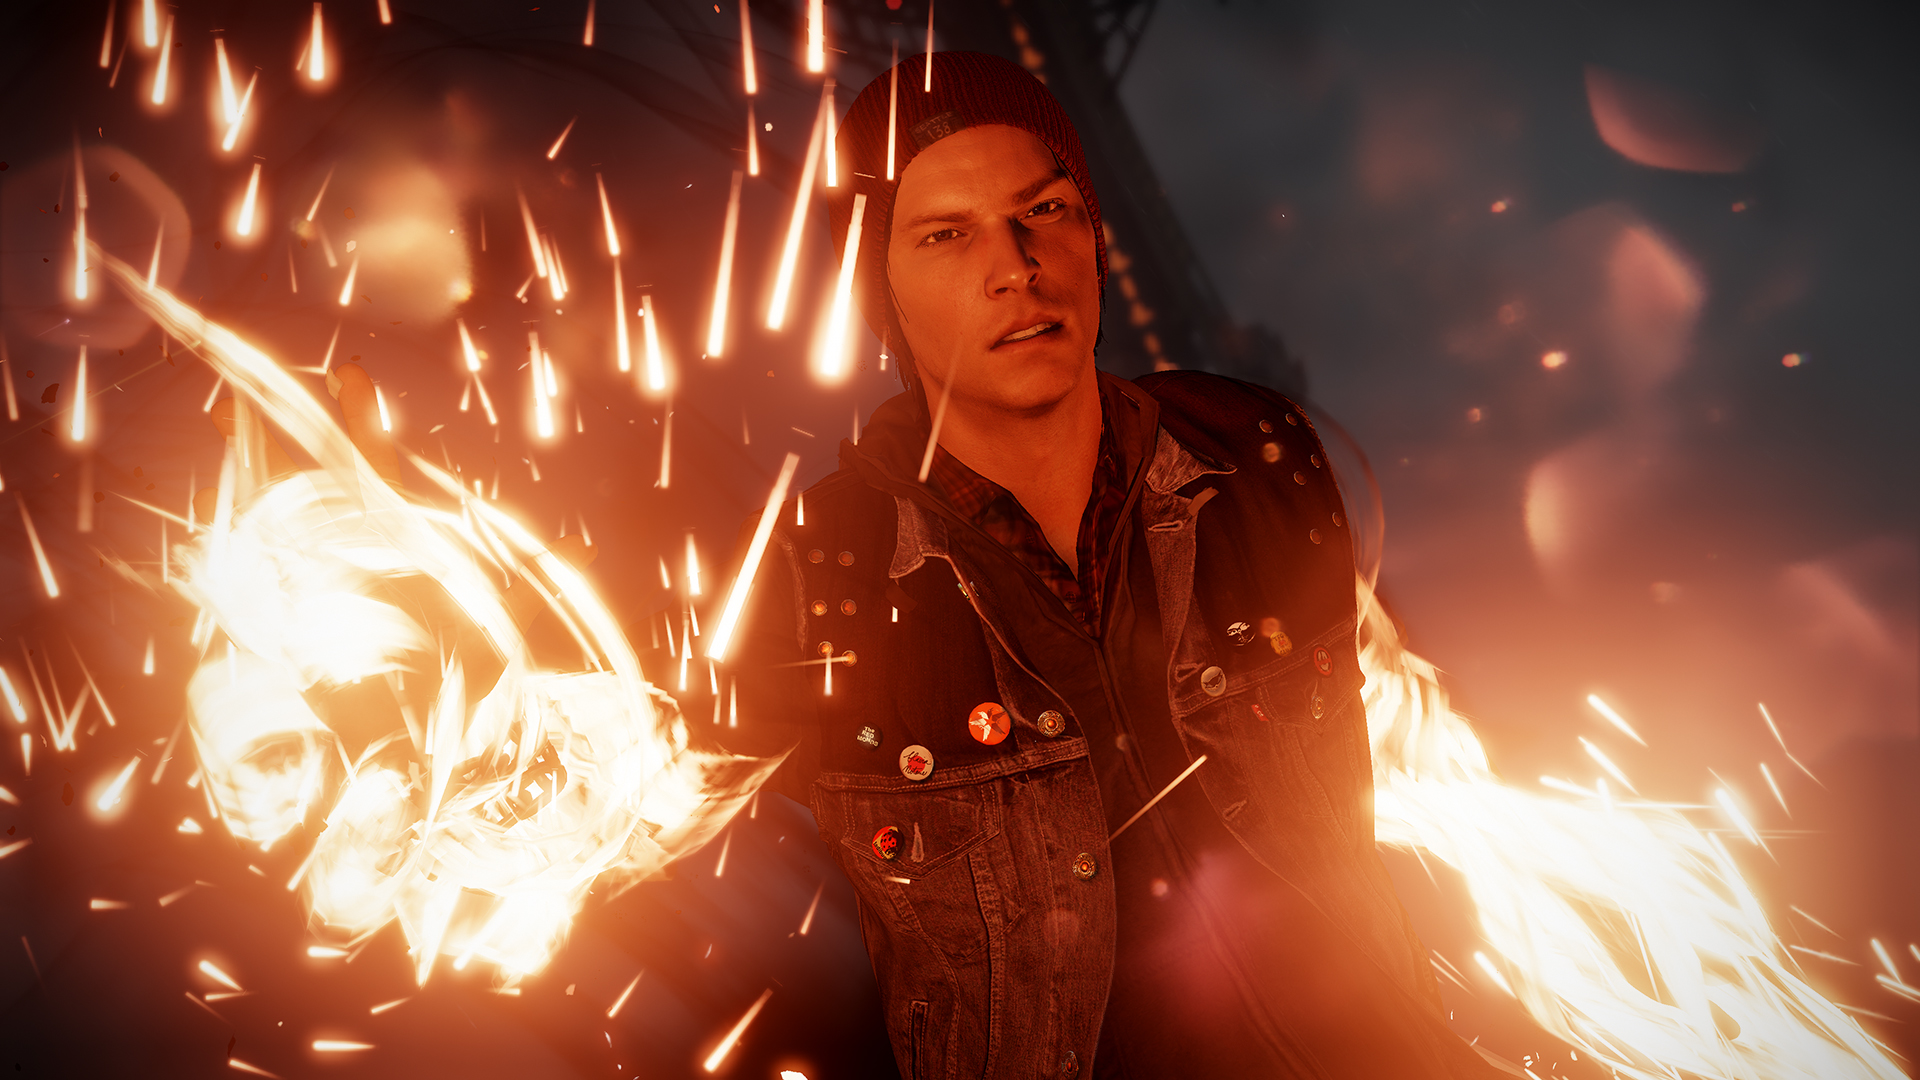 48821_yKTyzcJNFX_1377025843_infamous_second_son_d.jpg